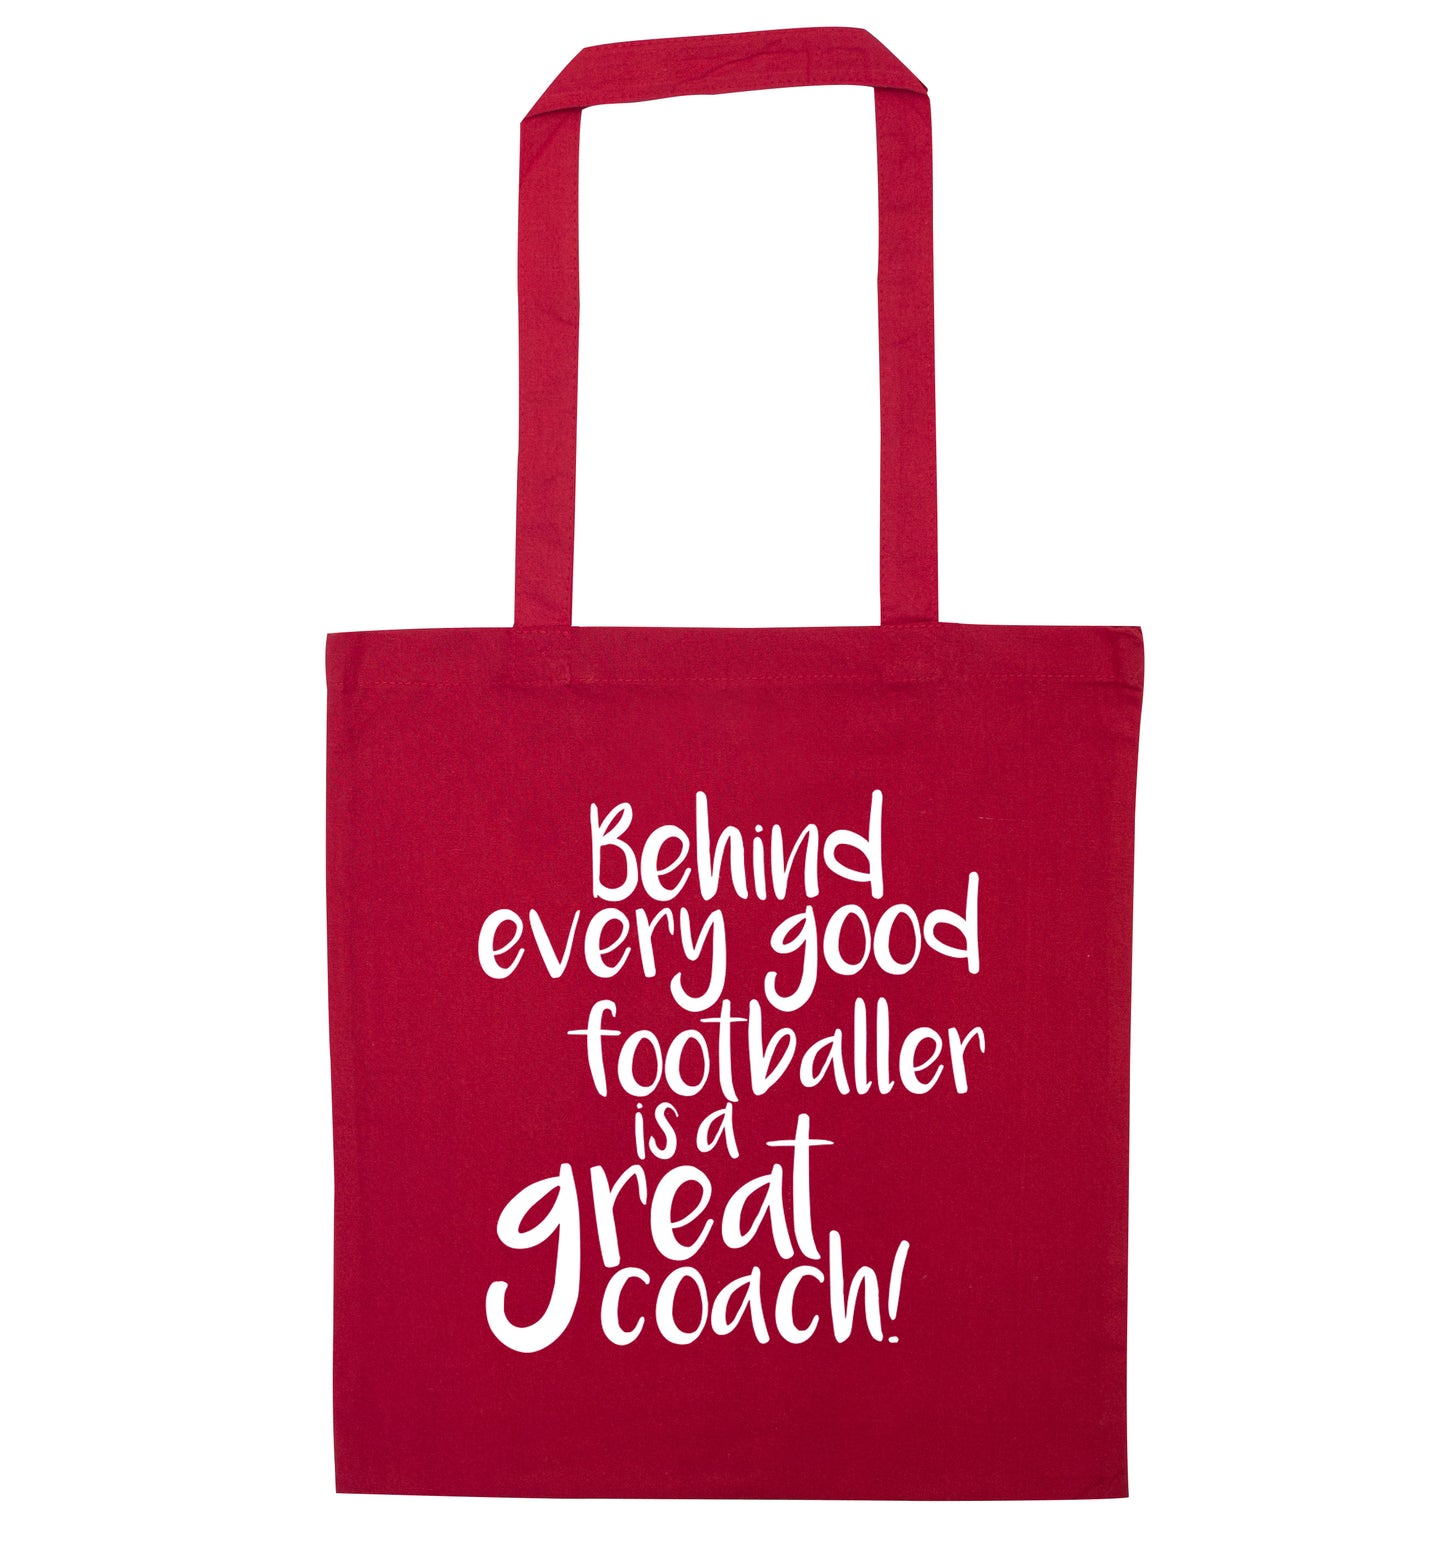 Behind every good footballer is a great coach! red tote bag